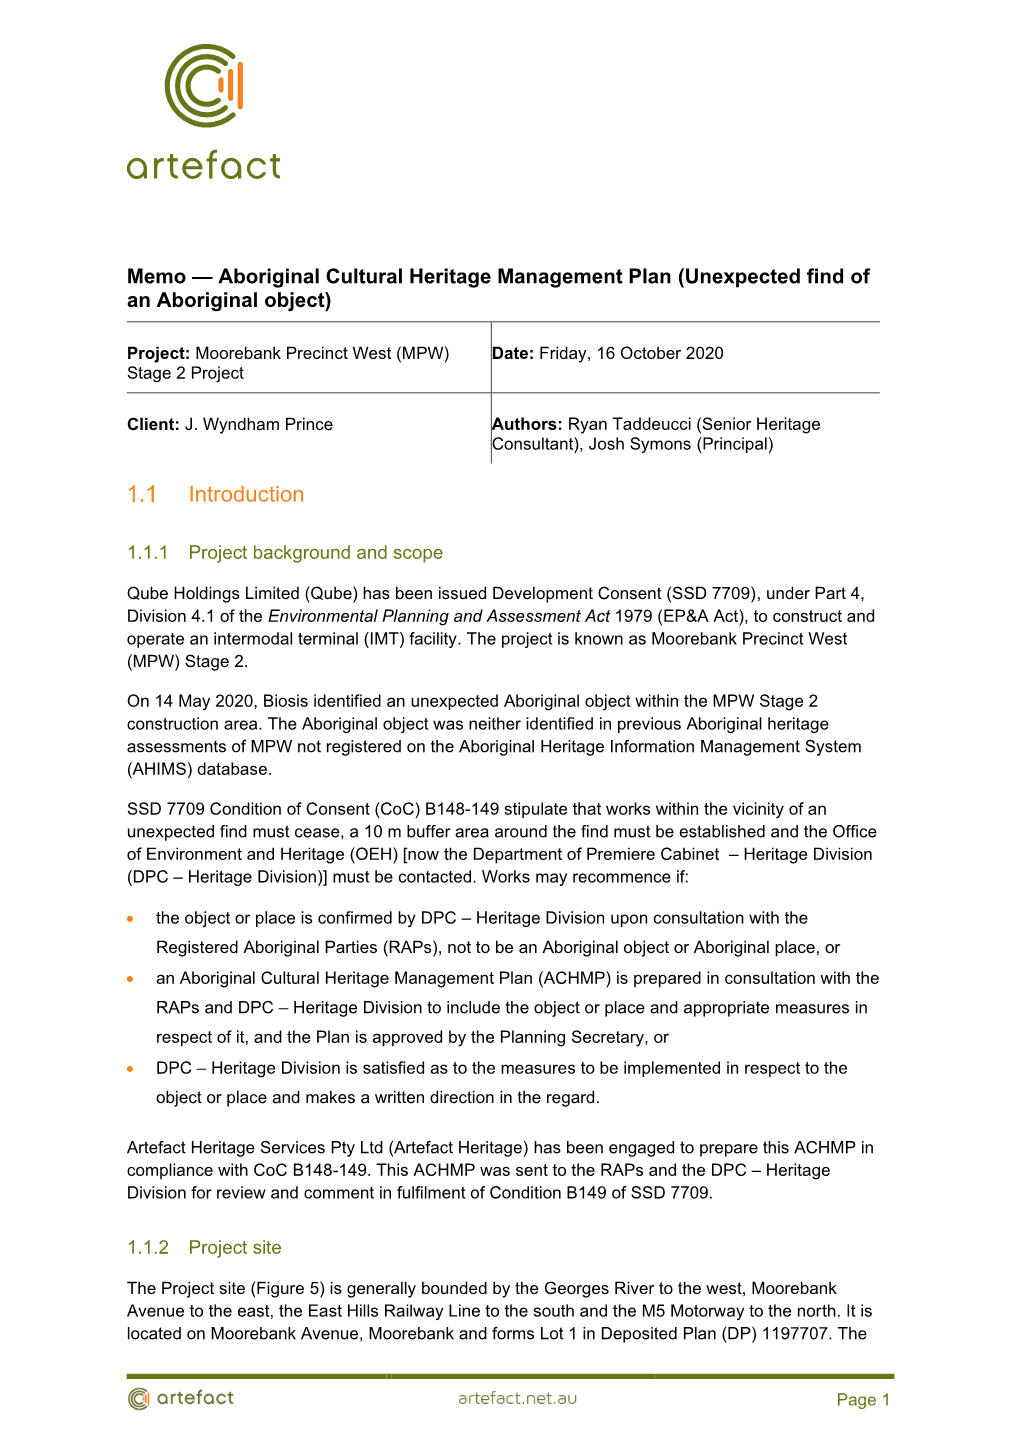 Memo — Aboriginal Cultural Heritage Management Plan (Unexpected Find of an Aboriginal Object)